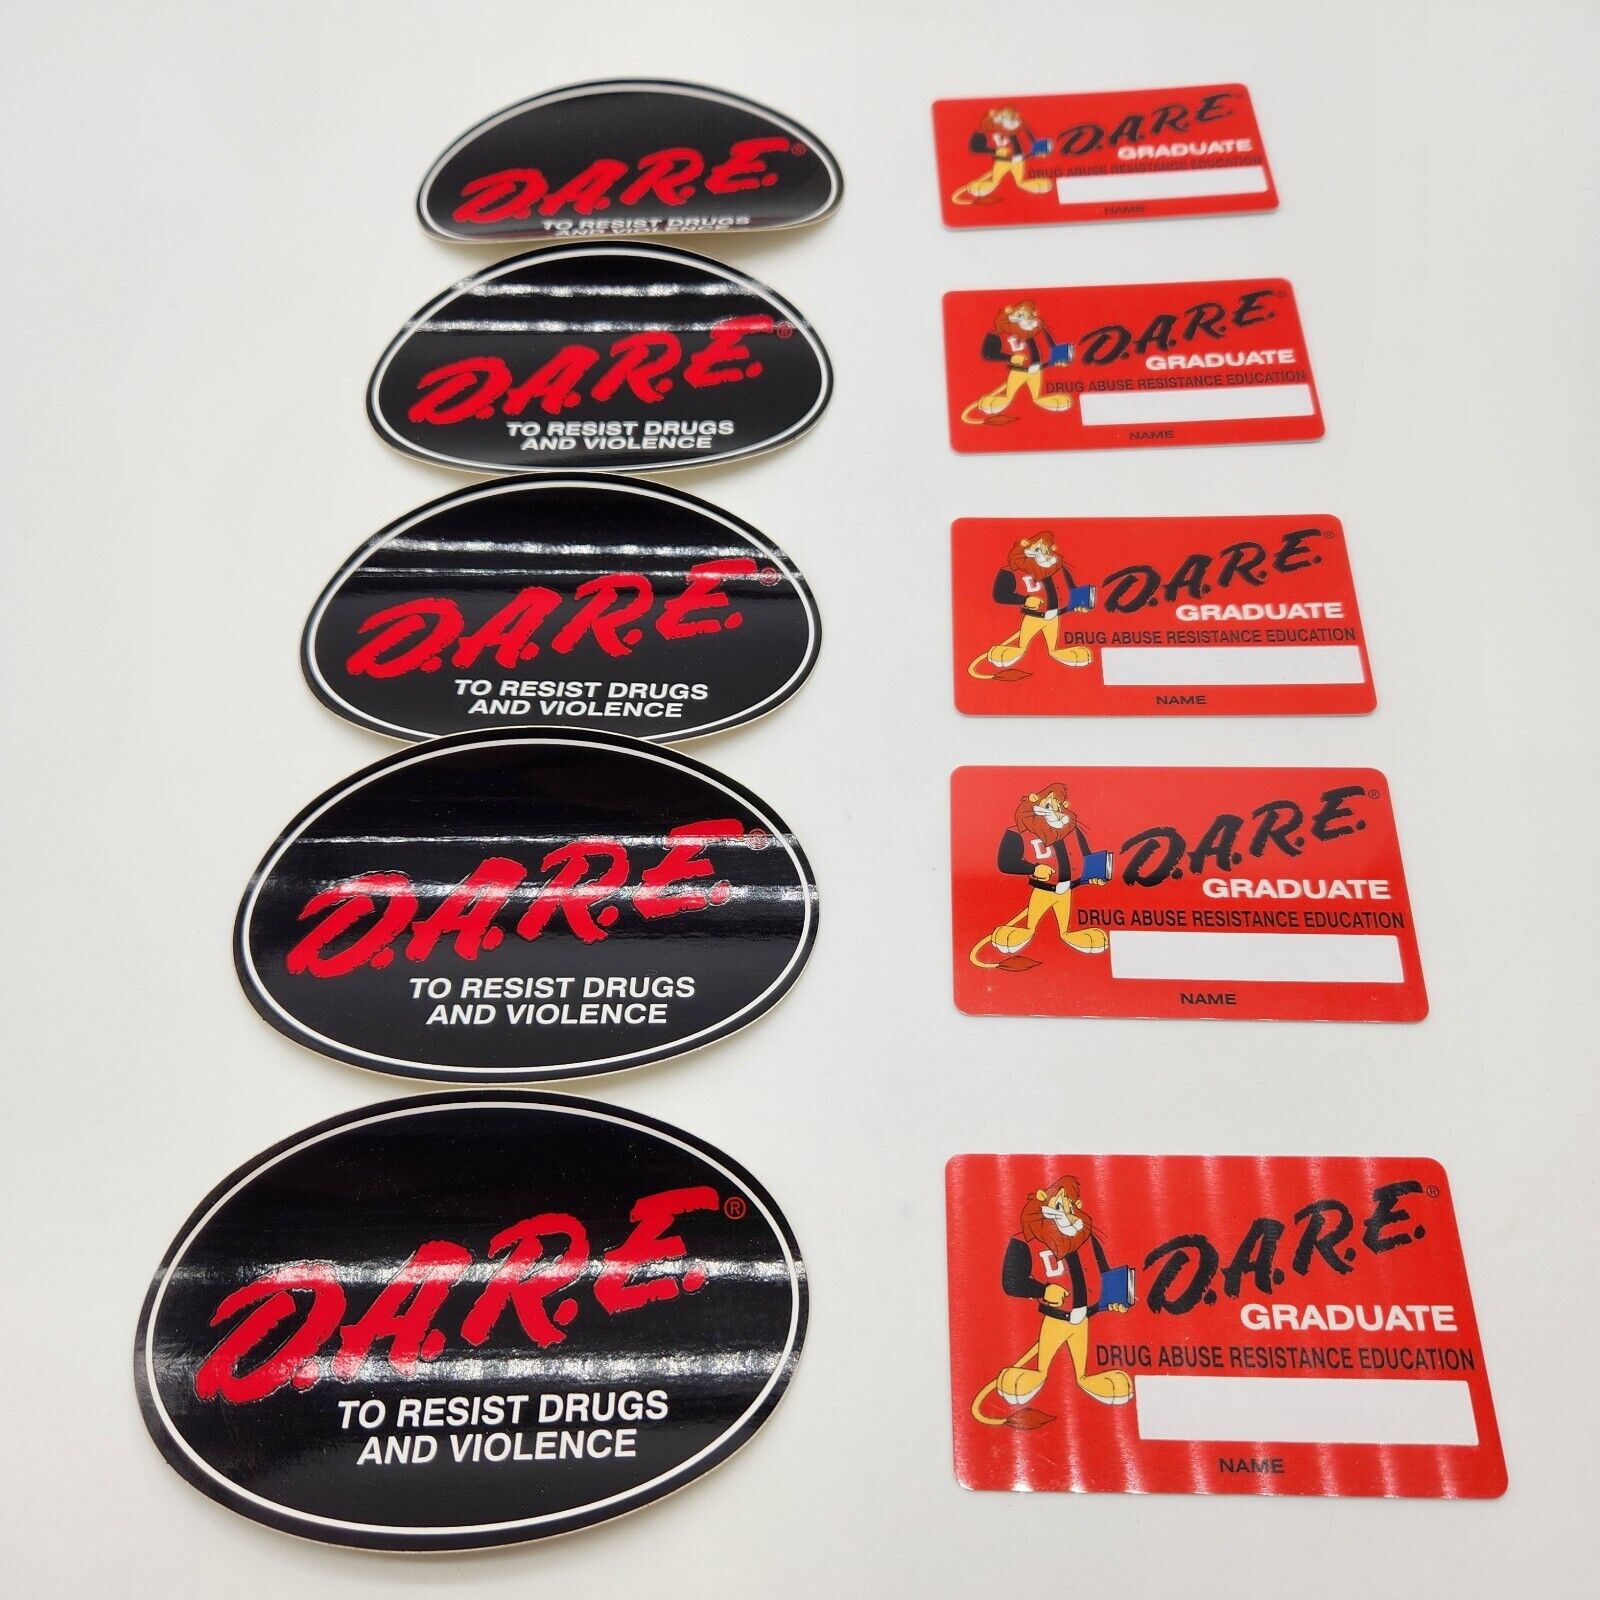 D.A.R.E 5 Oval Sticker and 5 Graduate Cards New Unused Lot Dare Vintage 